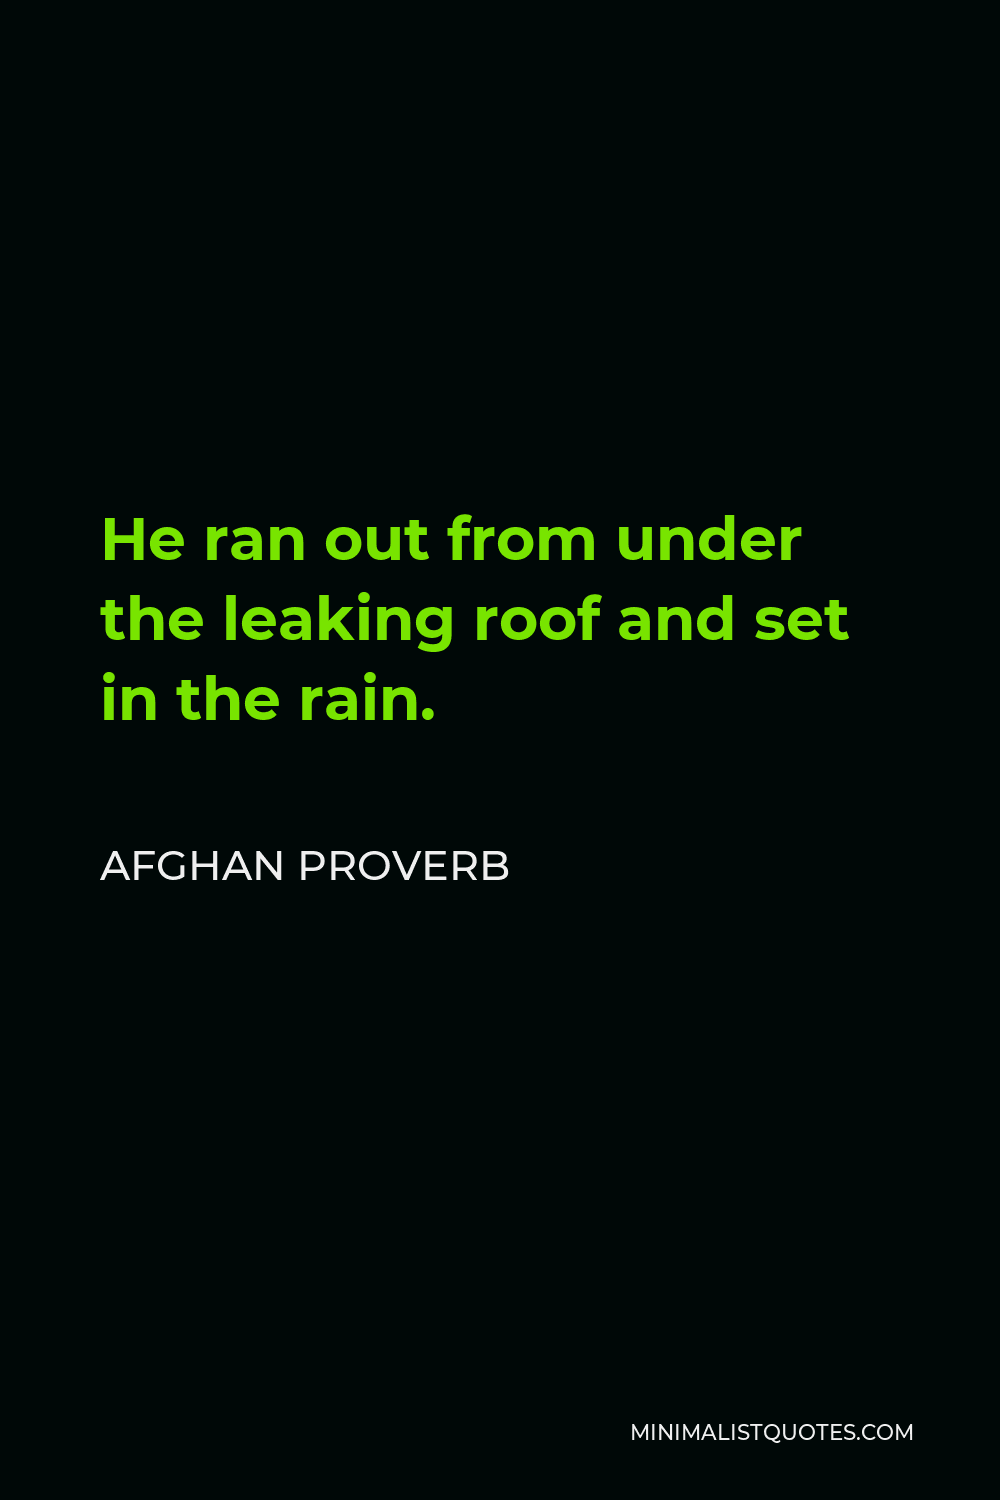 Afghan Proverb Quote - He ran out from under the leaking roof and set in the rain.